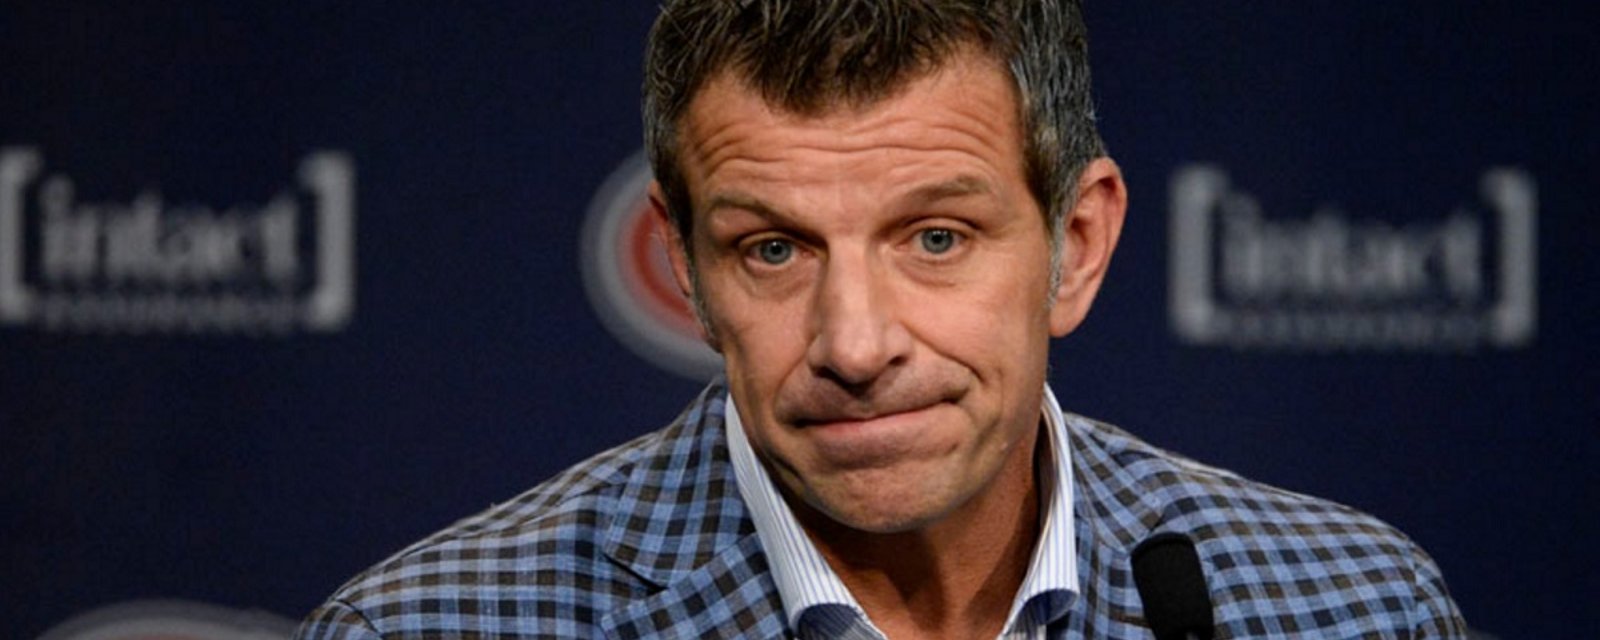 Marc Bergevin makes unbelievable comments about player loyalty. 